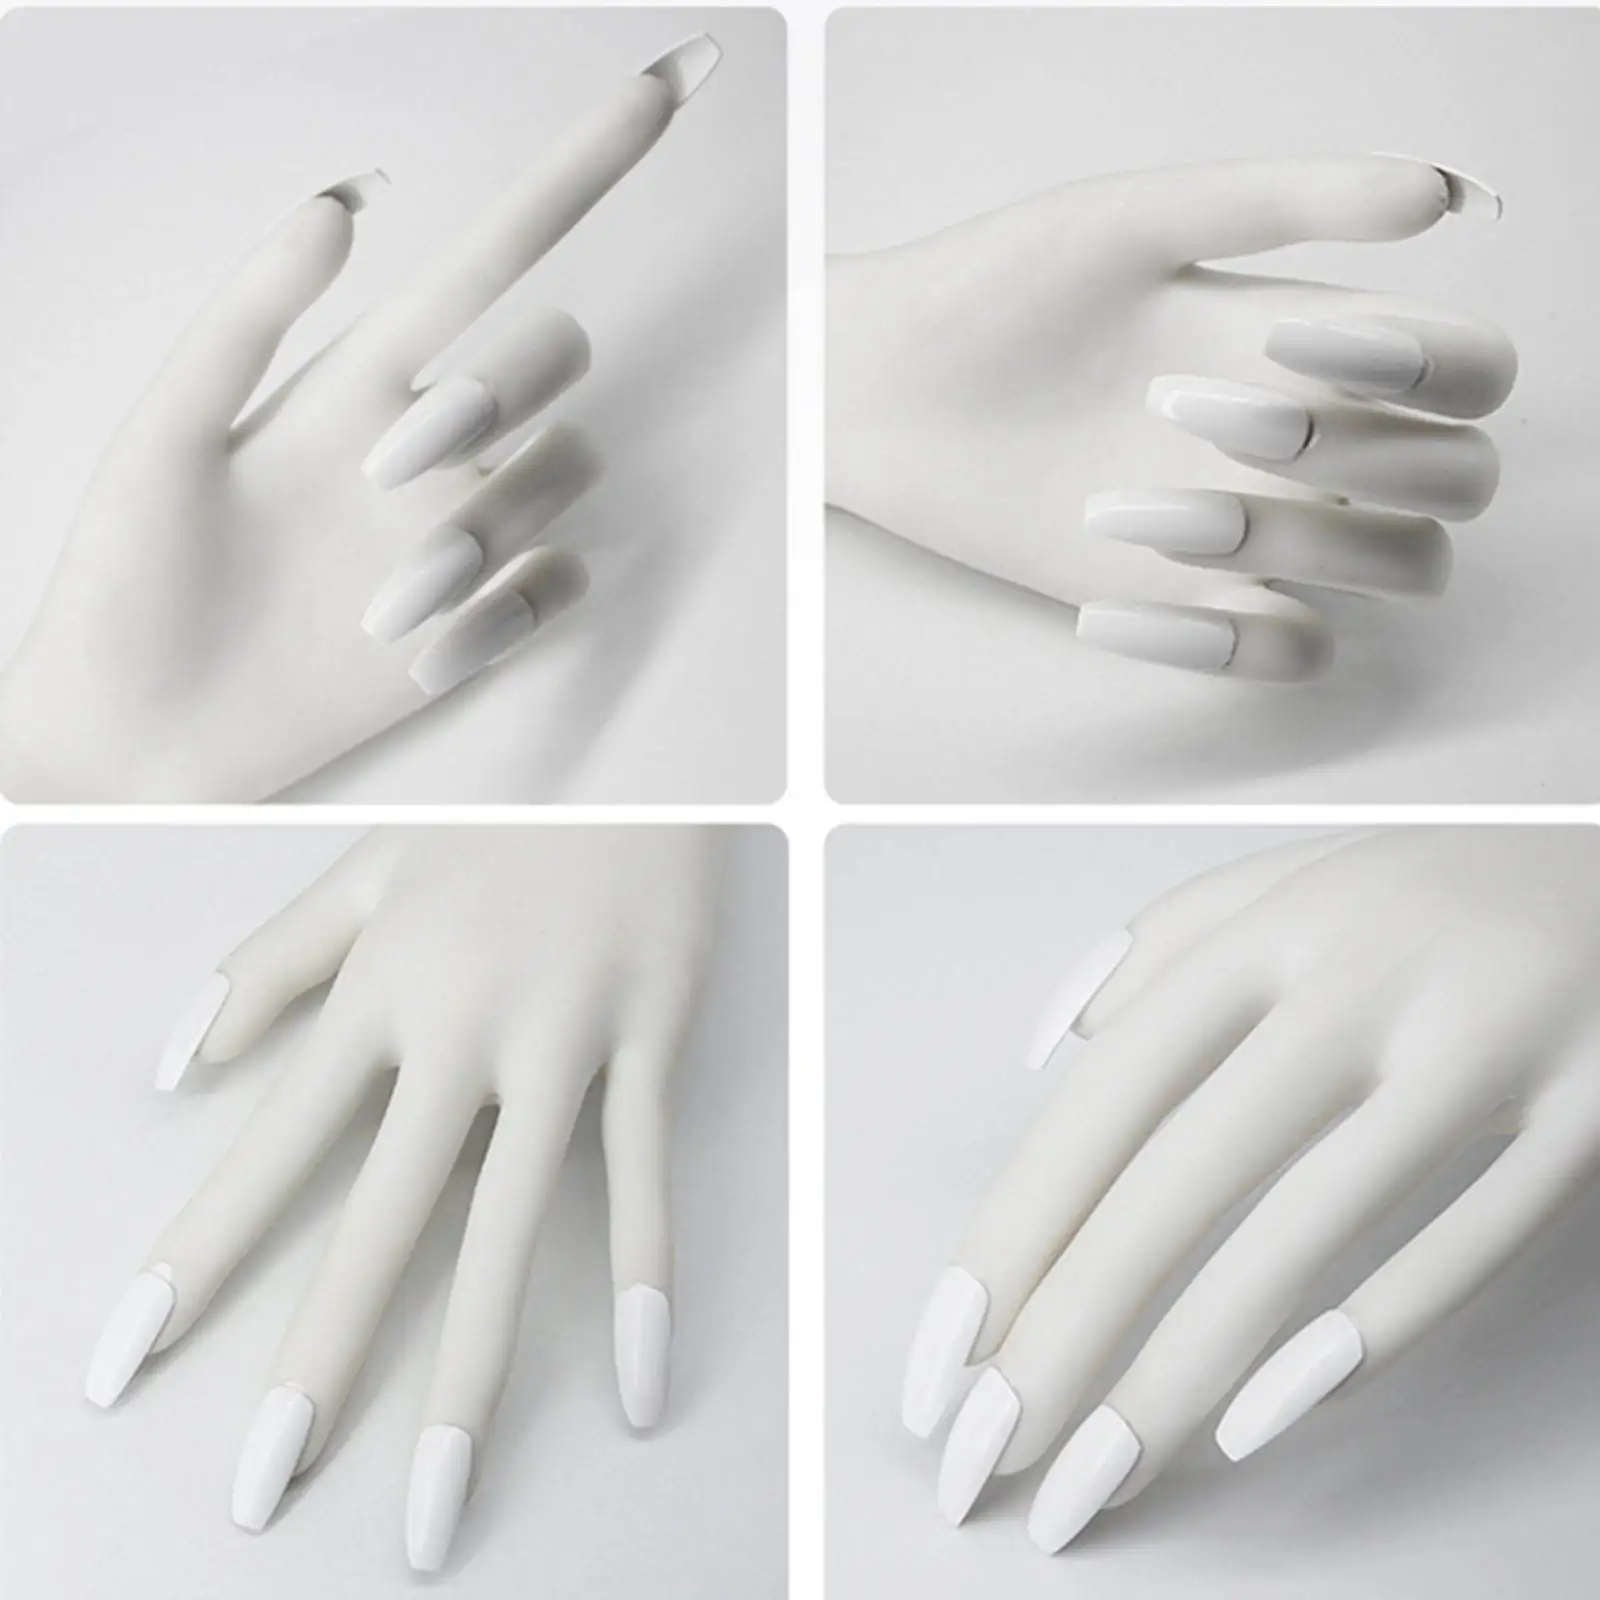 Nail Practice Hand Fake Model Hands for Nails Practice Technician Manicure Supply Home Salon